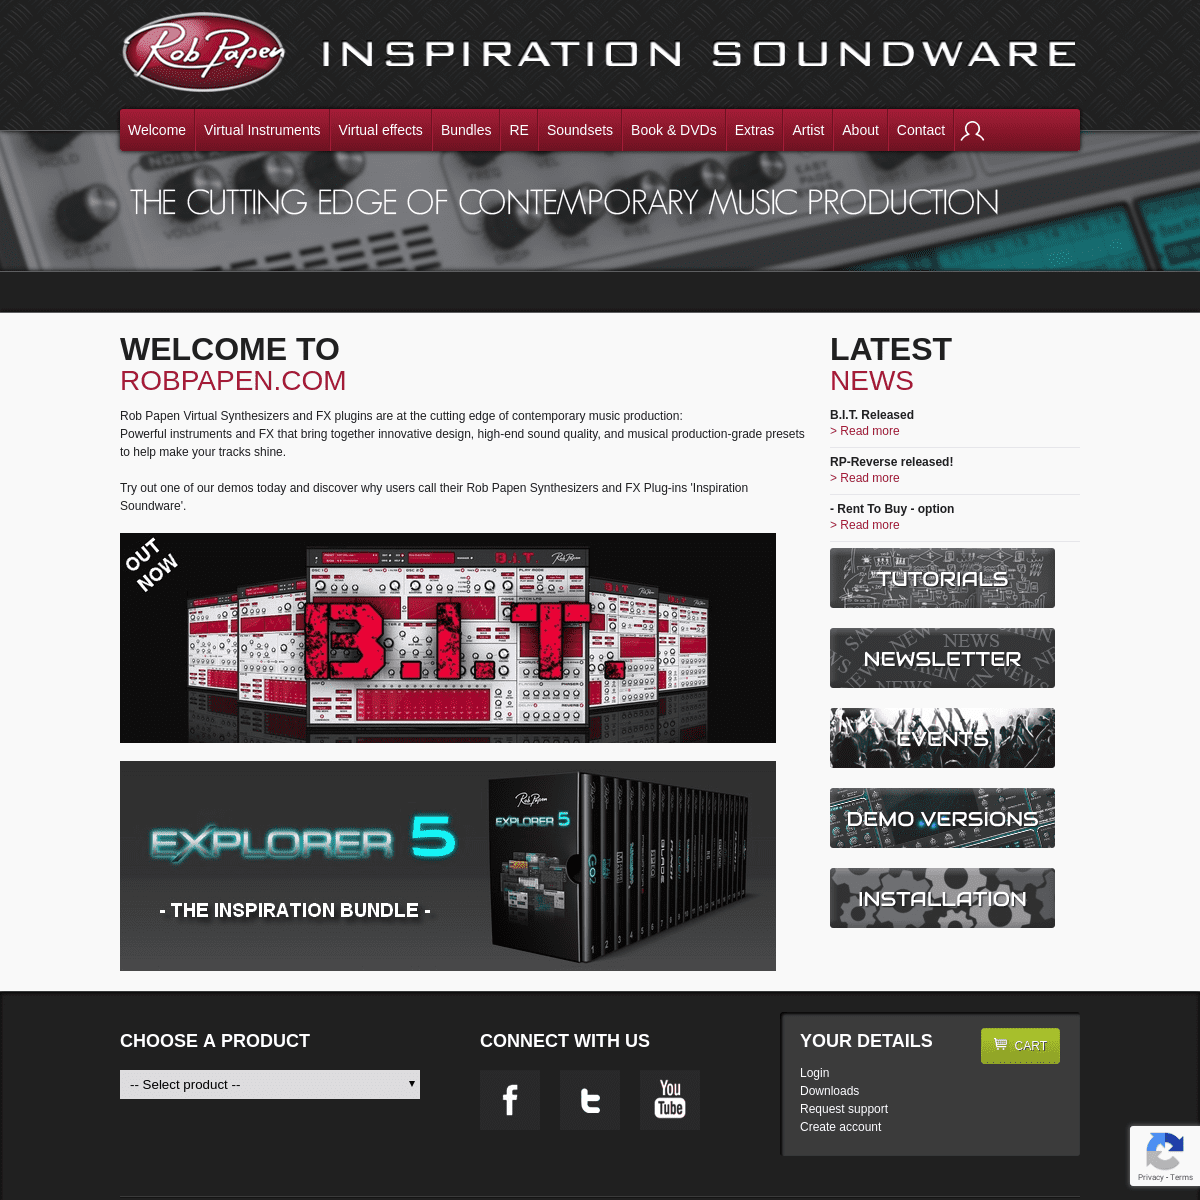 Rob Papen virtual synthesizers, instruments and effect plug-ins.